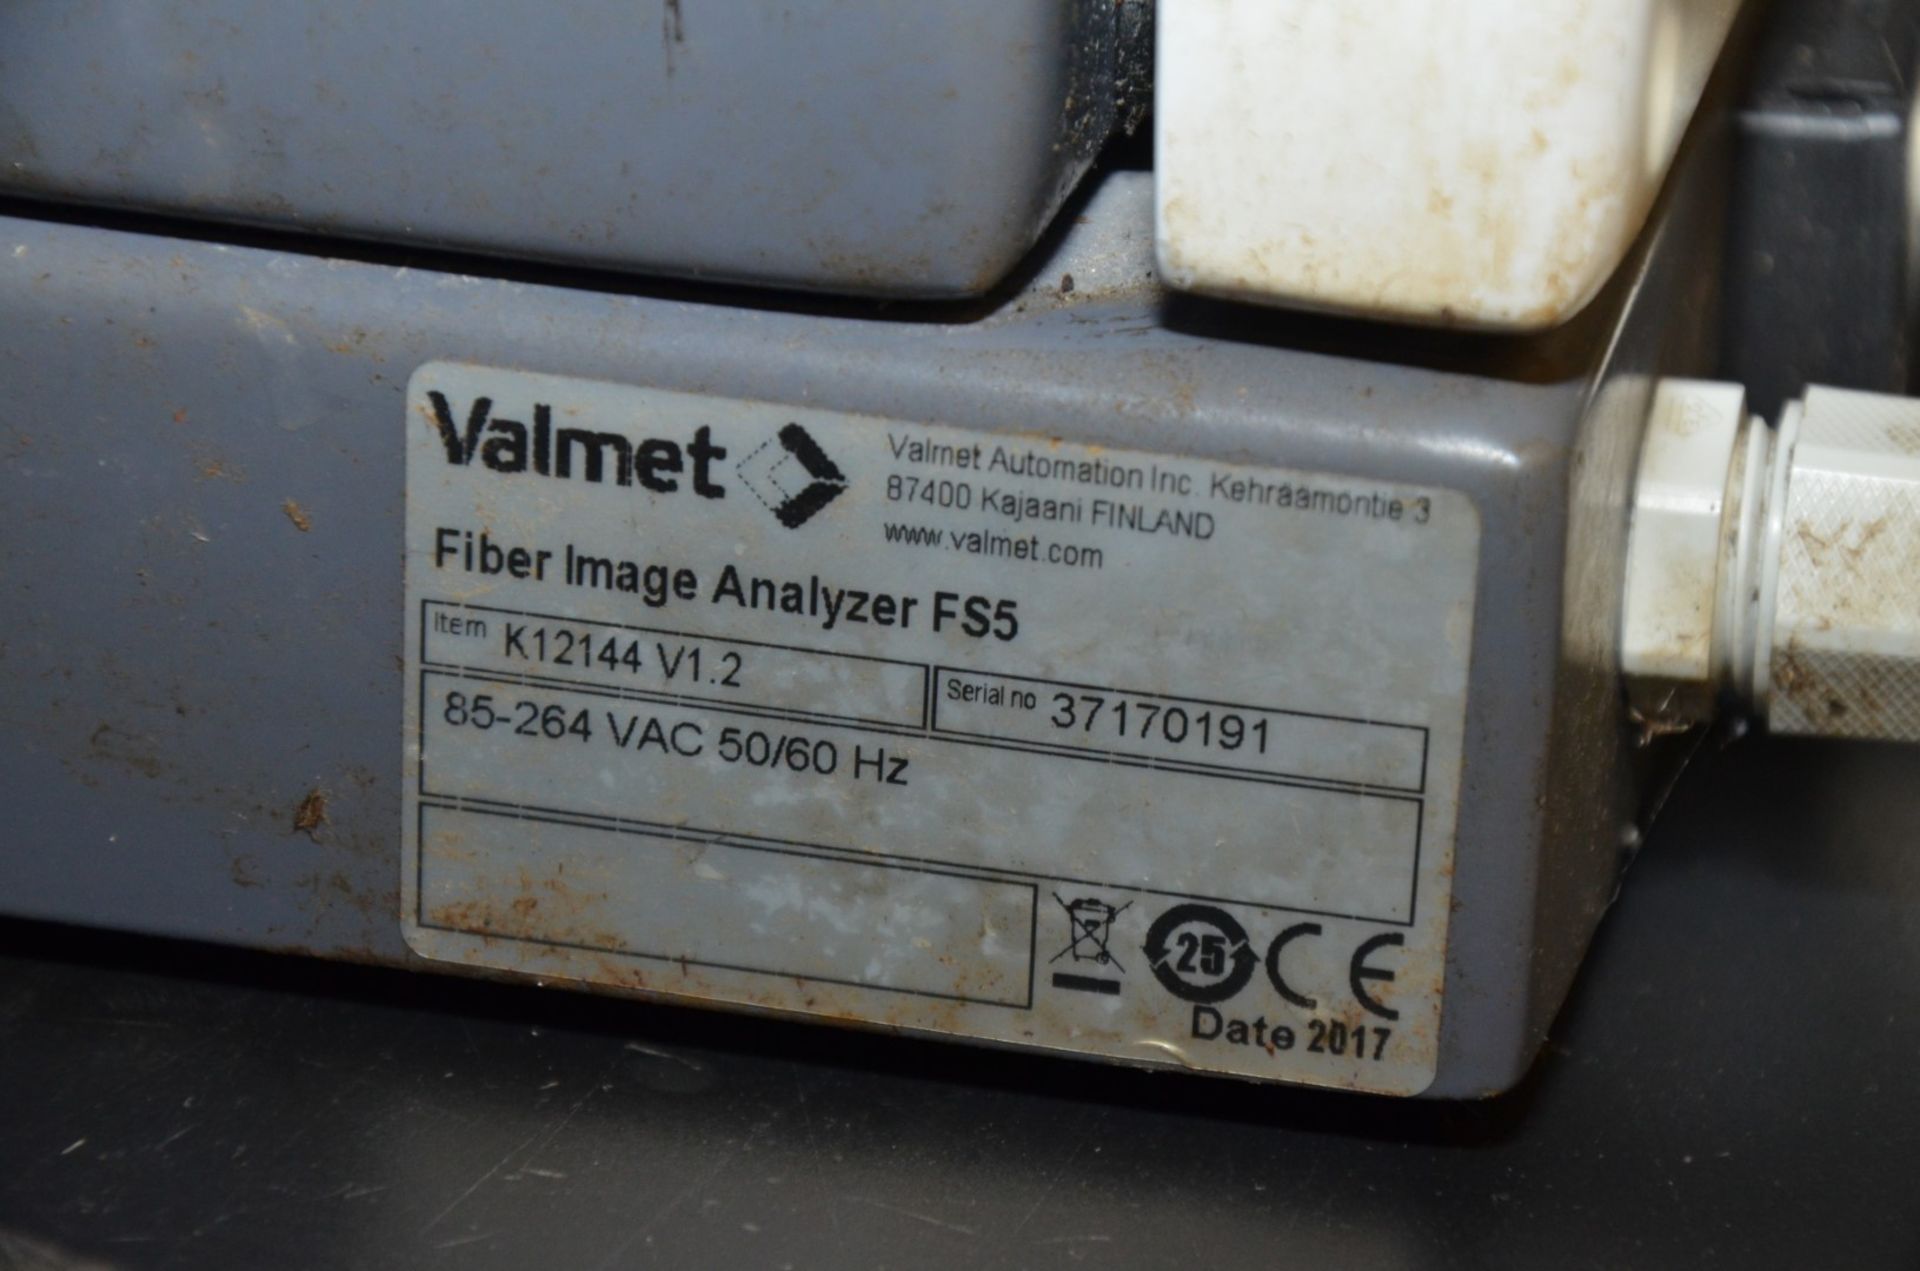 VALMET (2017) FS5 OPTICAL FIBER IMAGE ANALYZER WITH VALMET AUTOMATION VER 2.3 DIGITAL TOUCH SCREEN - Image 10 of 10